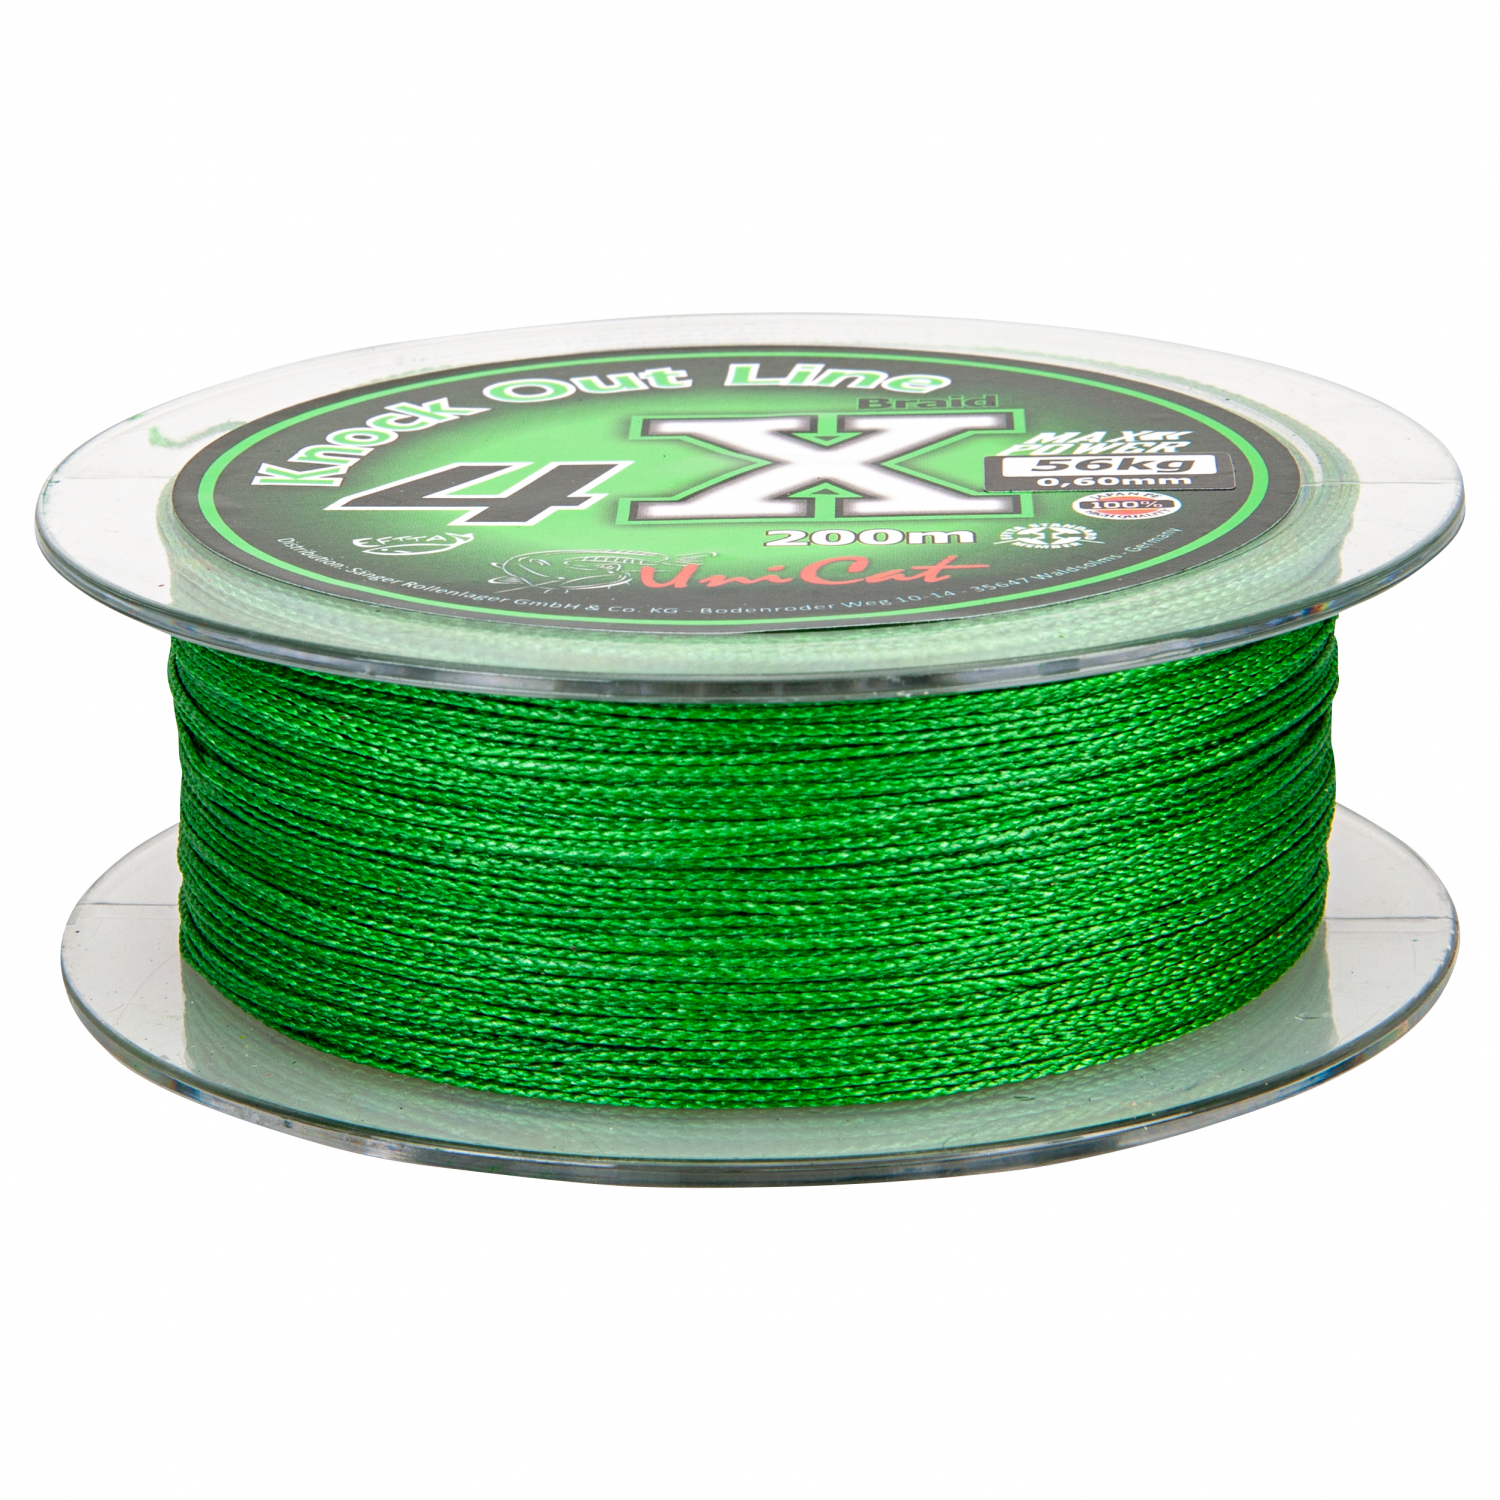 Uni Cat Catfish Line 4X Braid Knock Out Line (200 m) at low prices